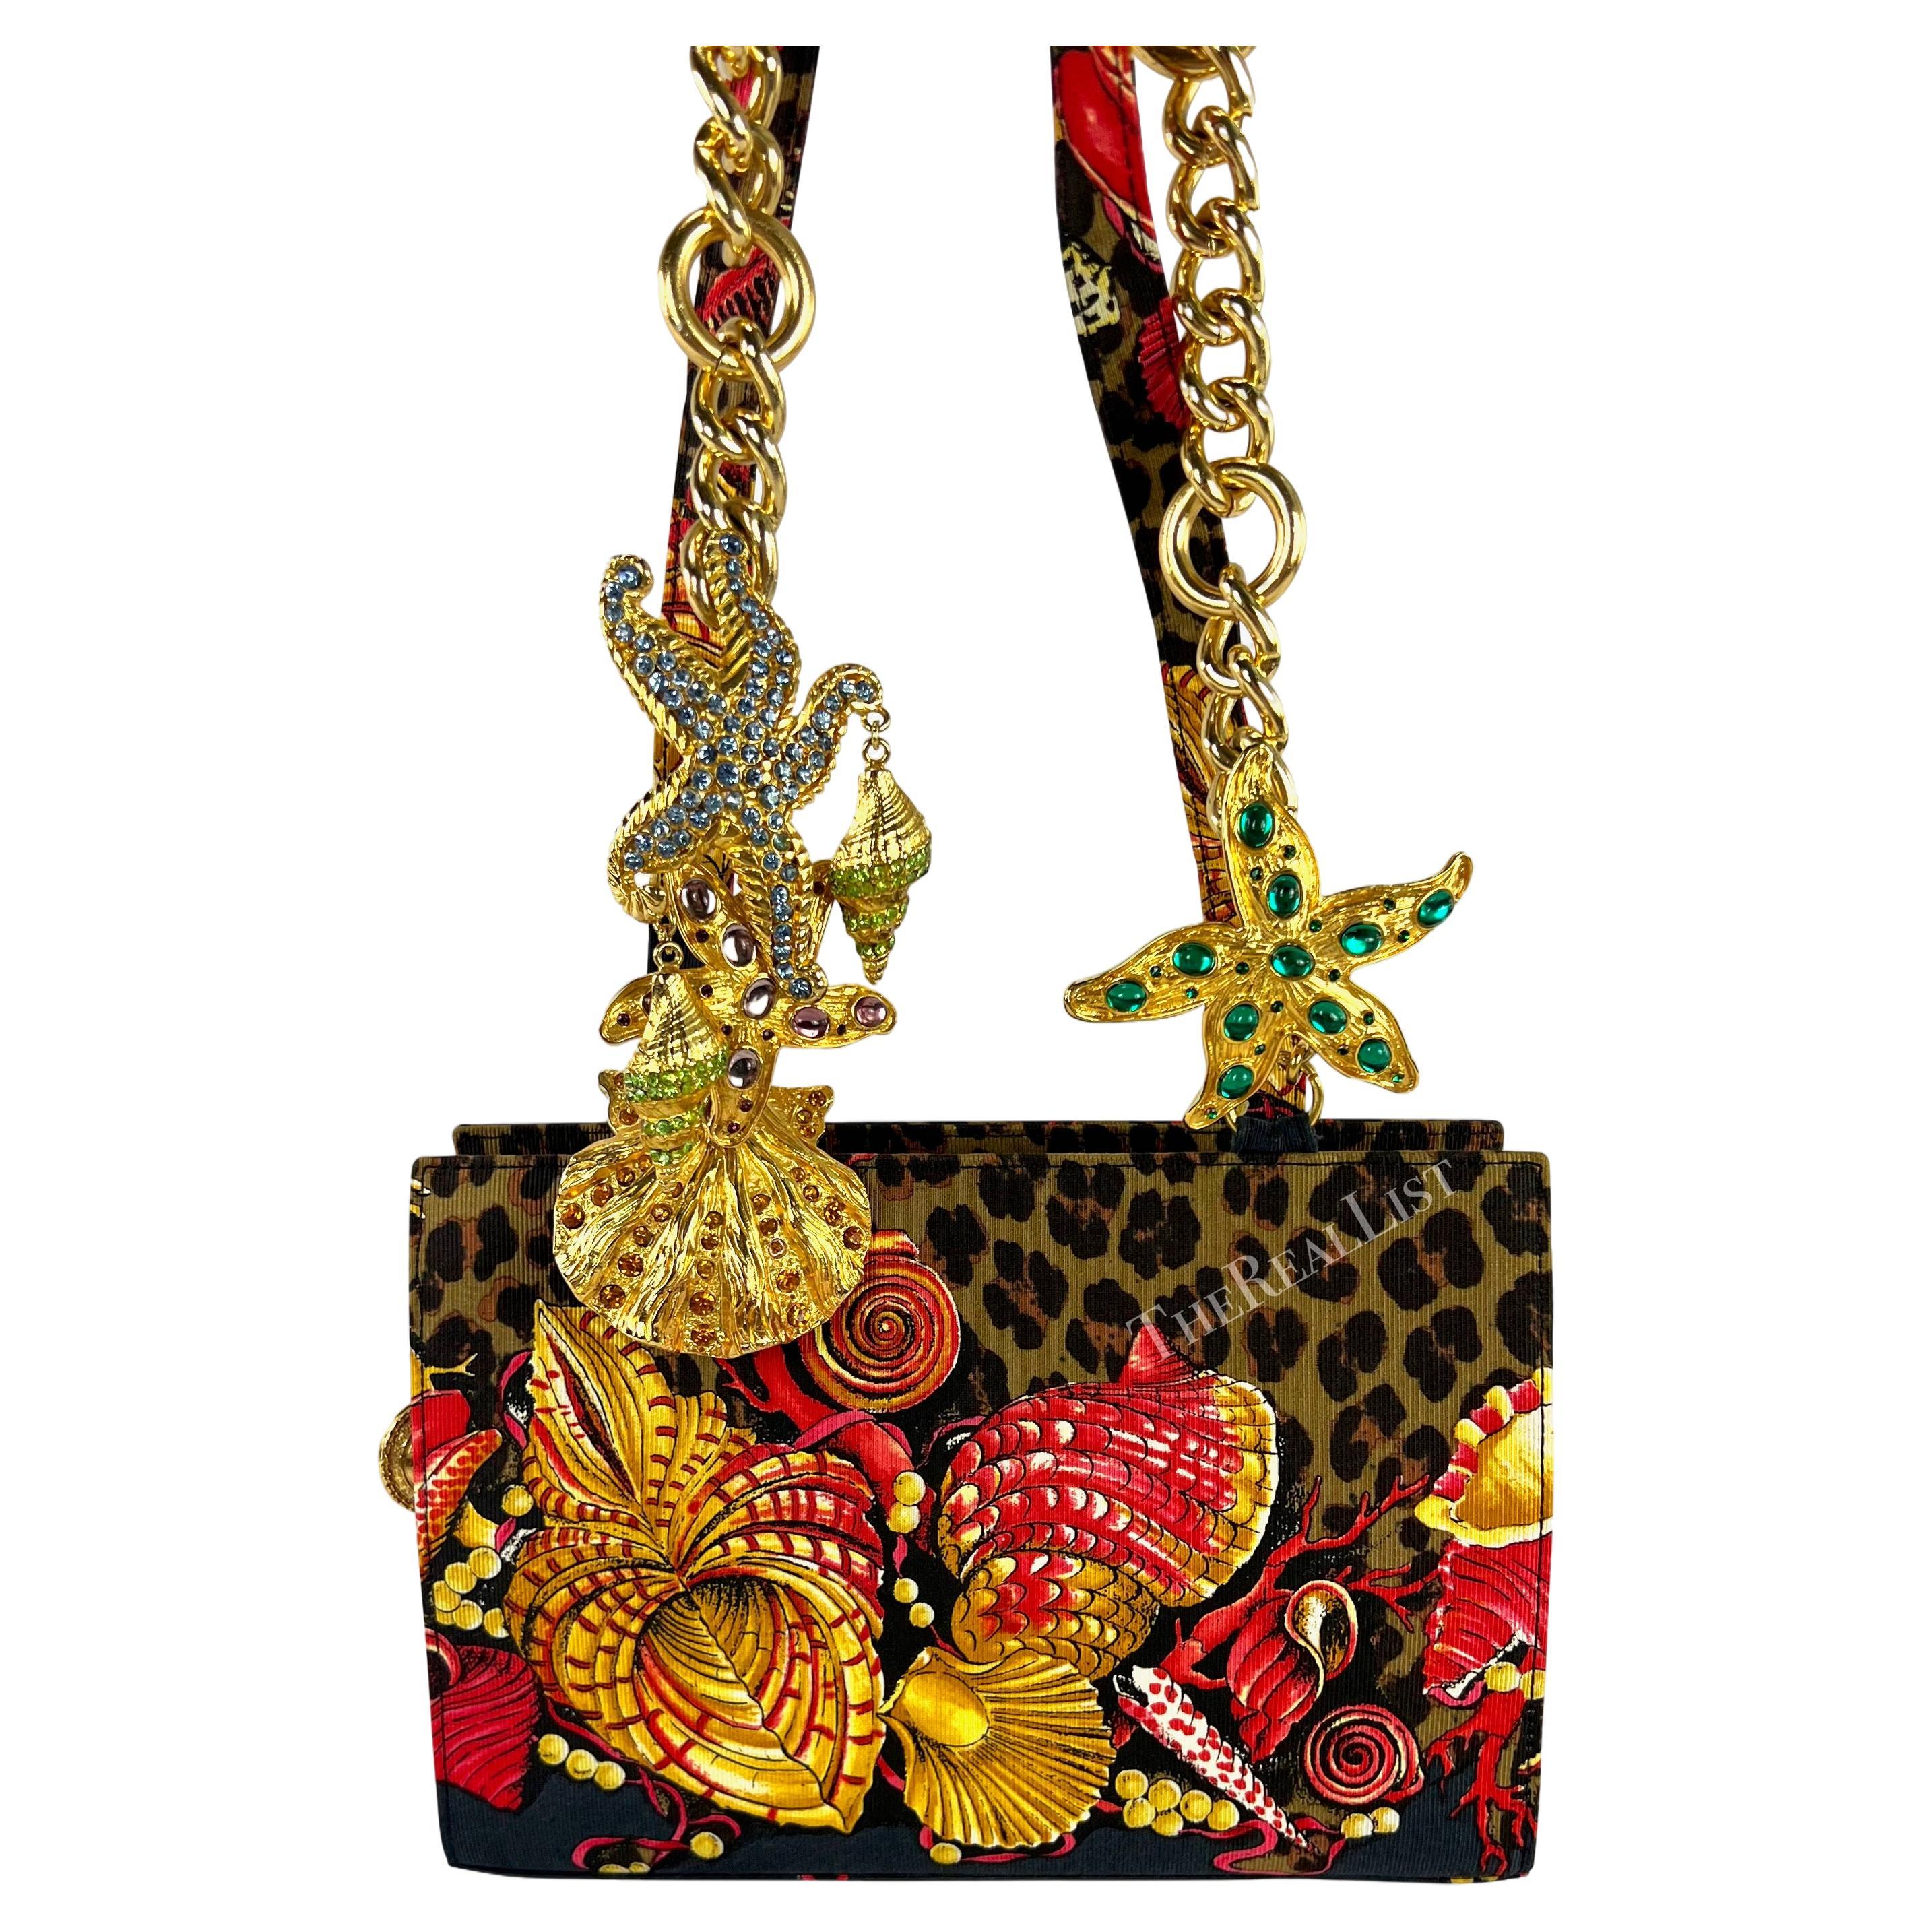 S/S 1992 Gianni Versace Runway Rhinestone Gold Shell Jewel Chain Crossbody Bag  In Excellent Condition For Sale In West Hollywood, CA